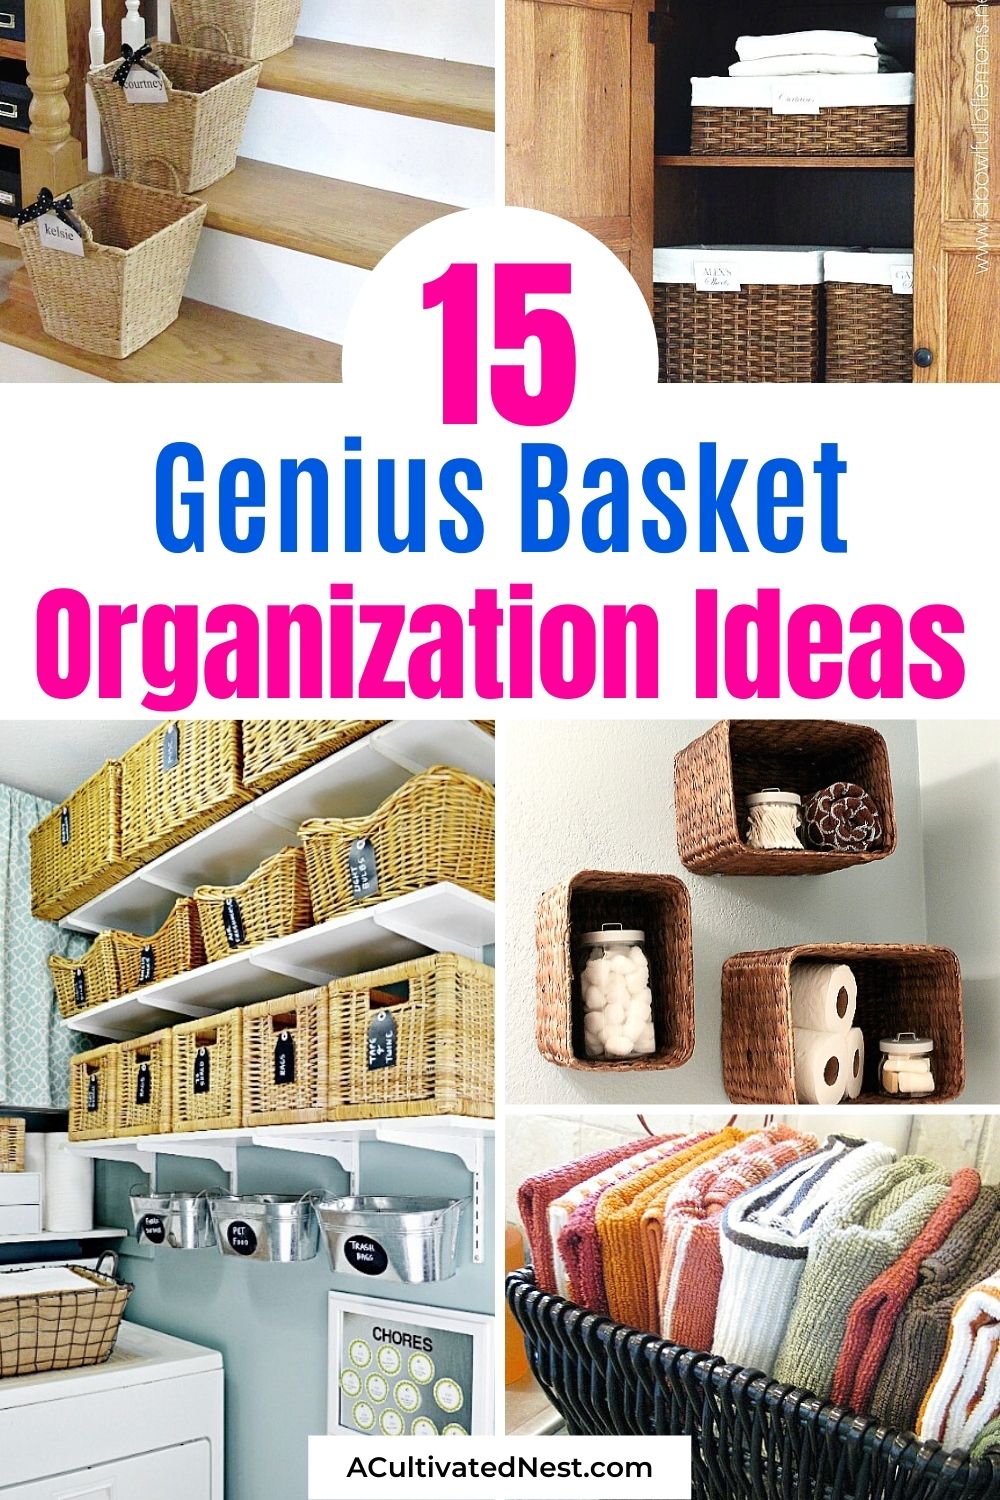 15 Pretty Ways To Organize With Baskets- If you want an easy, frugal, and beautiful way to organize your home, then you should use baskets! Check out these clever basket organization solutions for ideas! | #organizingTips #homeOrganization #organize #organization #ACultivatedNest